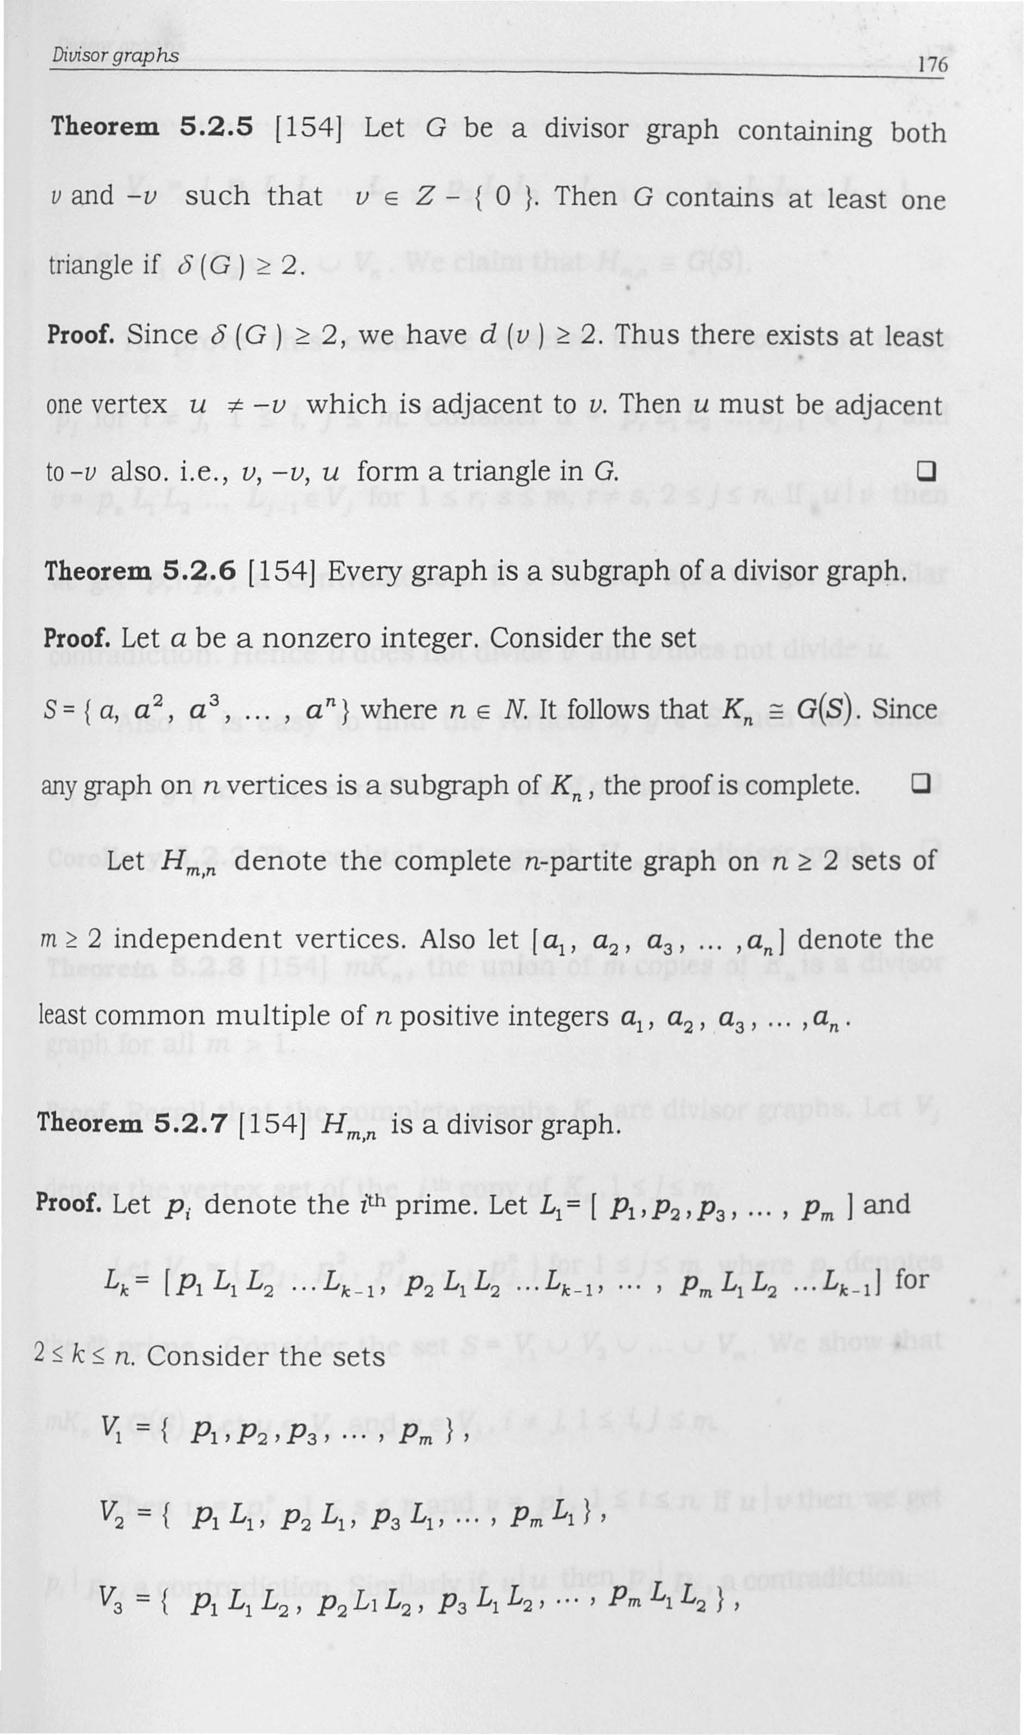 Divisor graphs 176 Theorem 5.2.5 [154] Let G be a divisor graph containing both v and -v such that v E Z - { 0 }. Then G contains at least one triangle if <5 (G ) ~ 2. Proof.